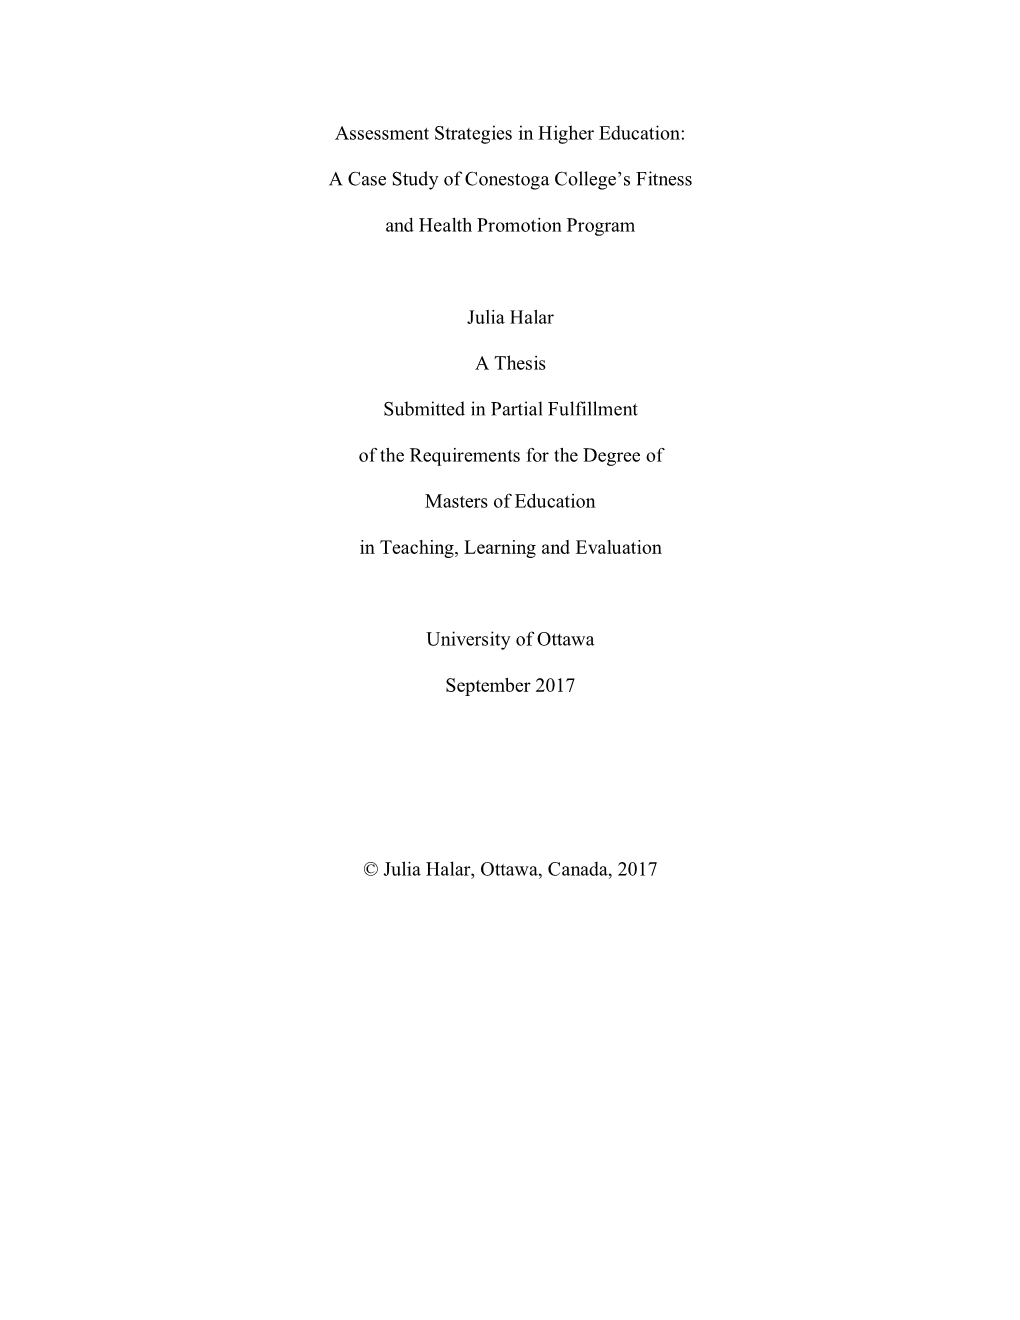 Assessment Strategies in Higher Education: a Case Study Of